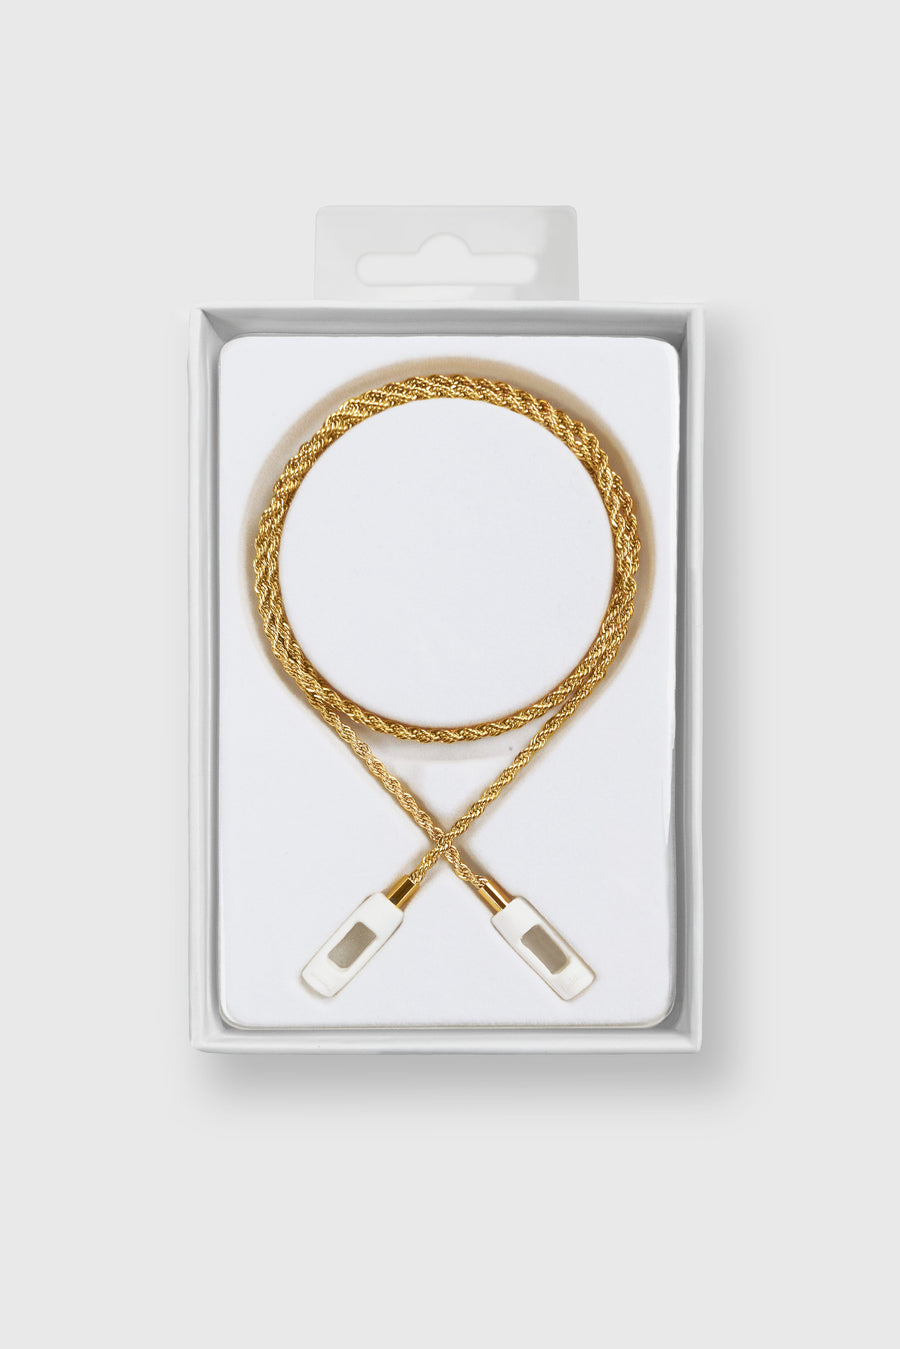 Tapper's real 18K gold plated original tech jewelry rope chain protects your AirPods. The luxurious, elevated and accessible necklace plated in precious metals steps up your AirPod jewellery game. Worried about losing your AirPods? Magnetic lock for convenient and hassle-free safekeeping around the neck. A must-have AirPods accessory crafted for ultimate luxury. Compatible with all generations of Apple AirPods and AirPods Pro. Designed in Sweden by Tapper. Free Express Shipping at gettapper.com